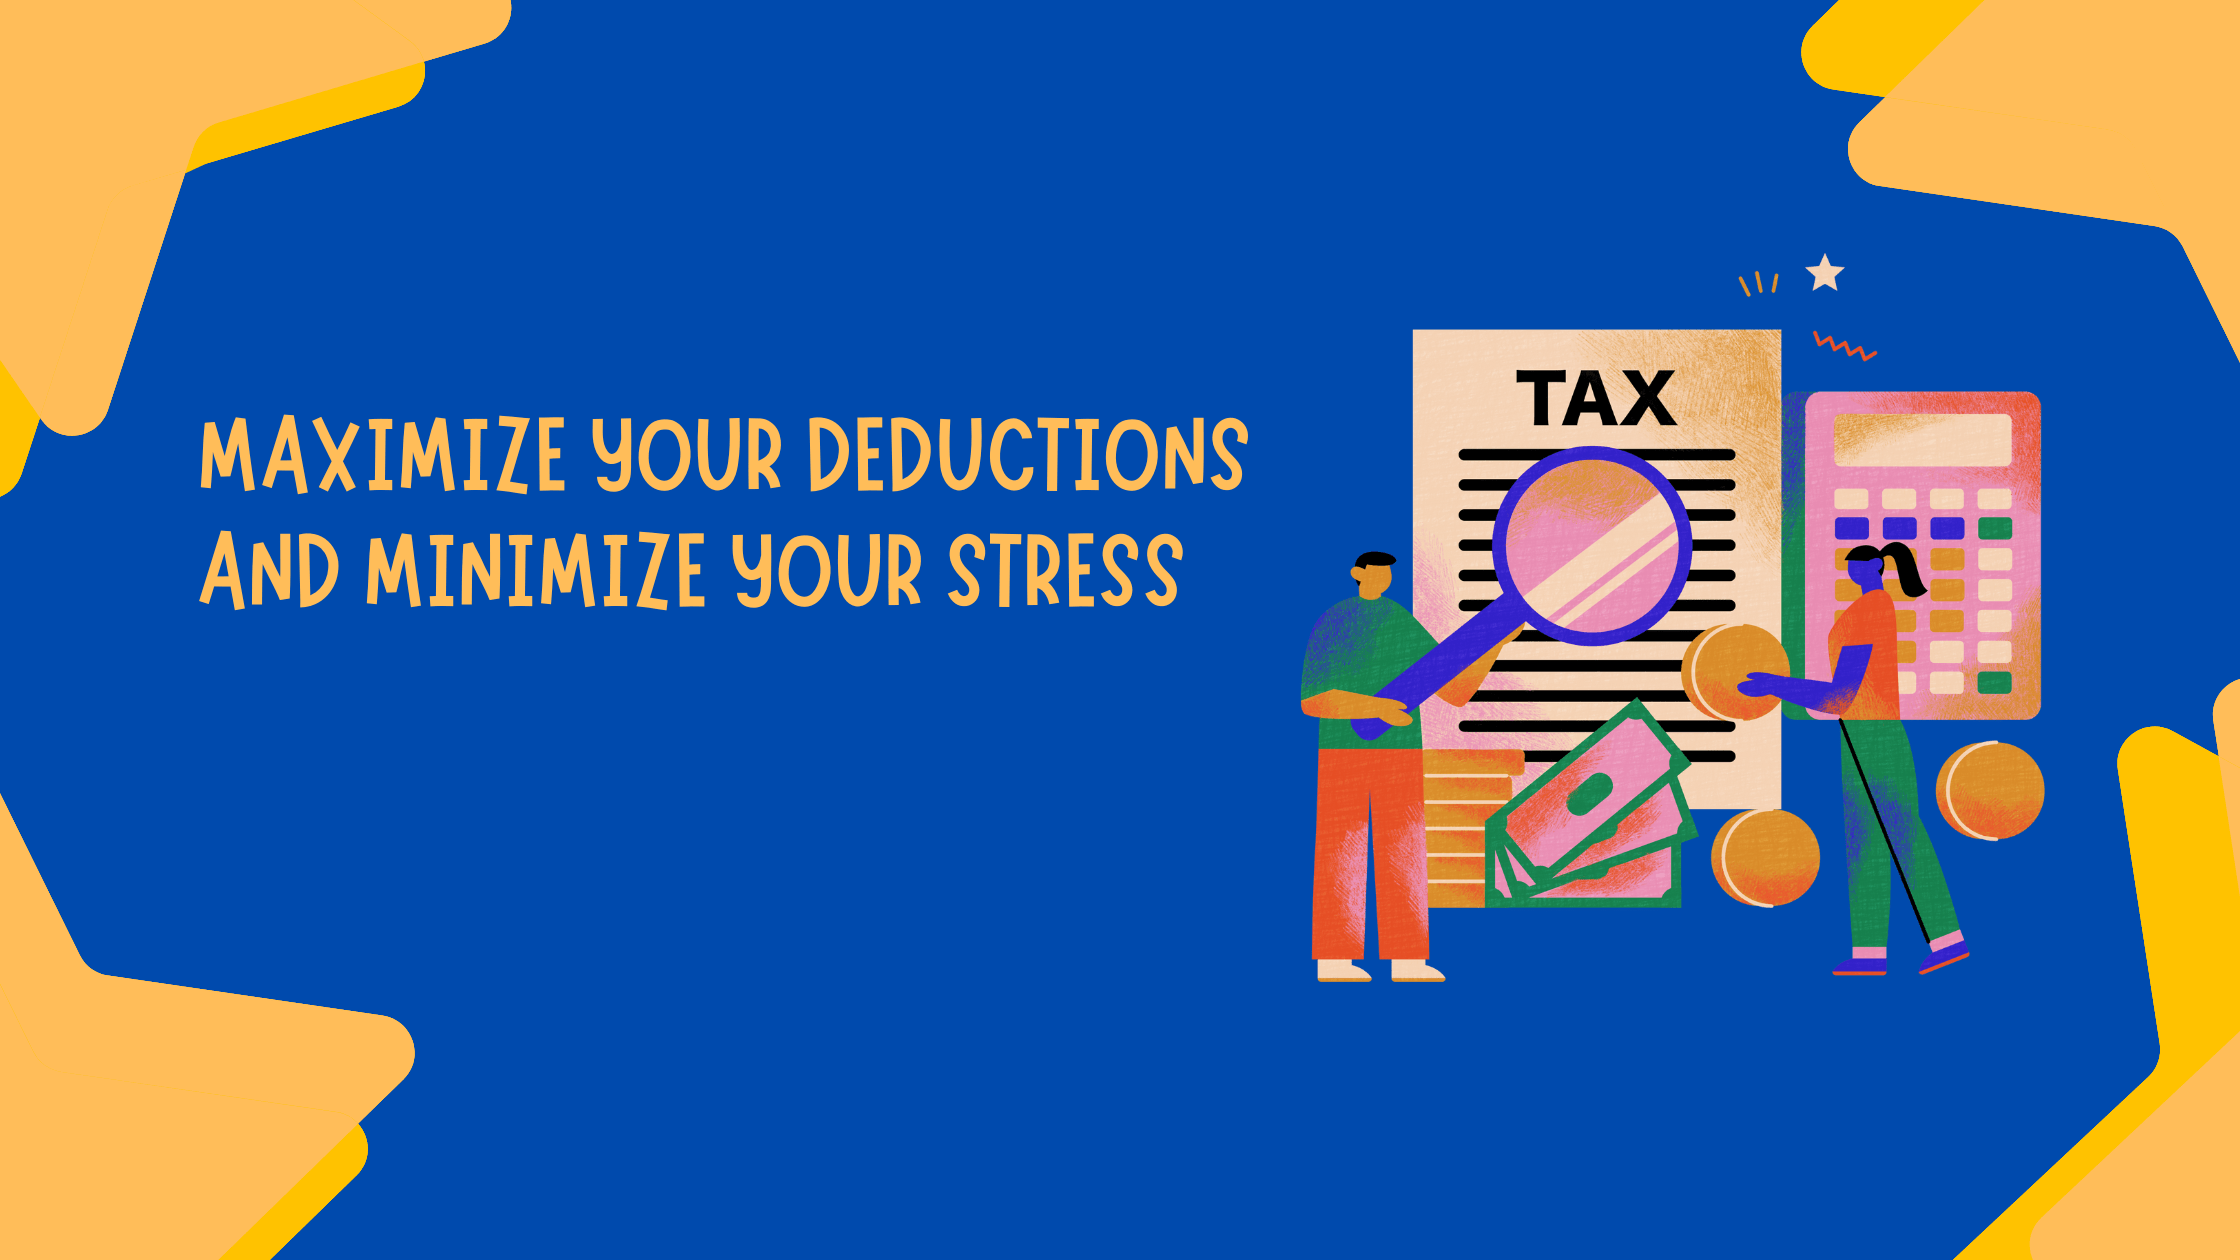 How to Maximize Your Deductions and Minimize Your Stress